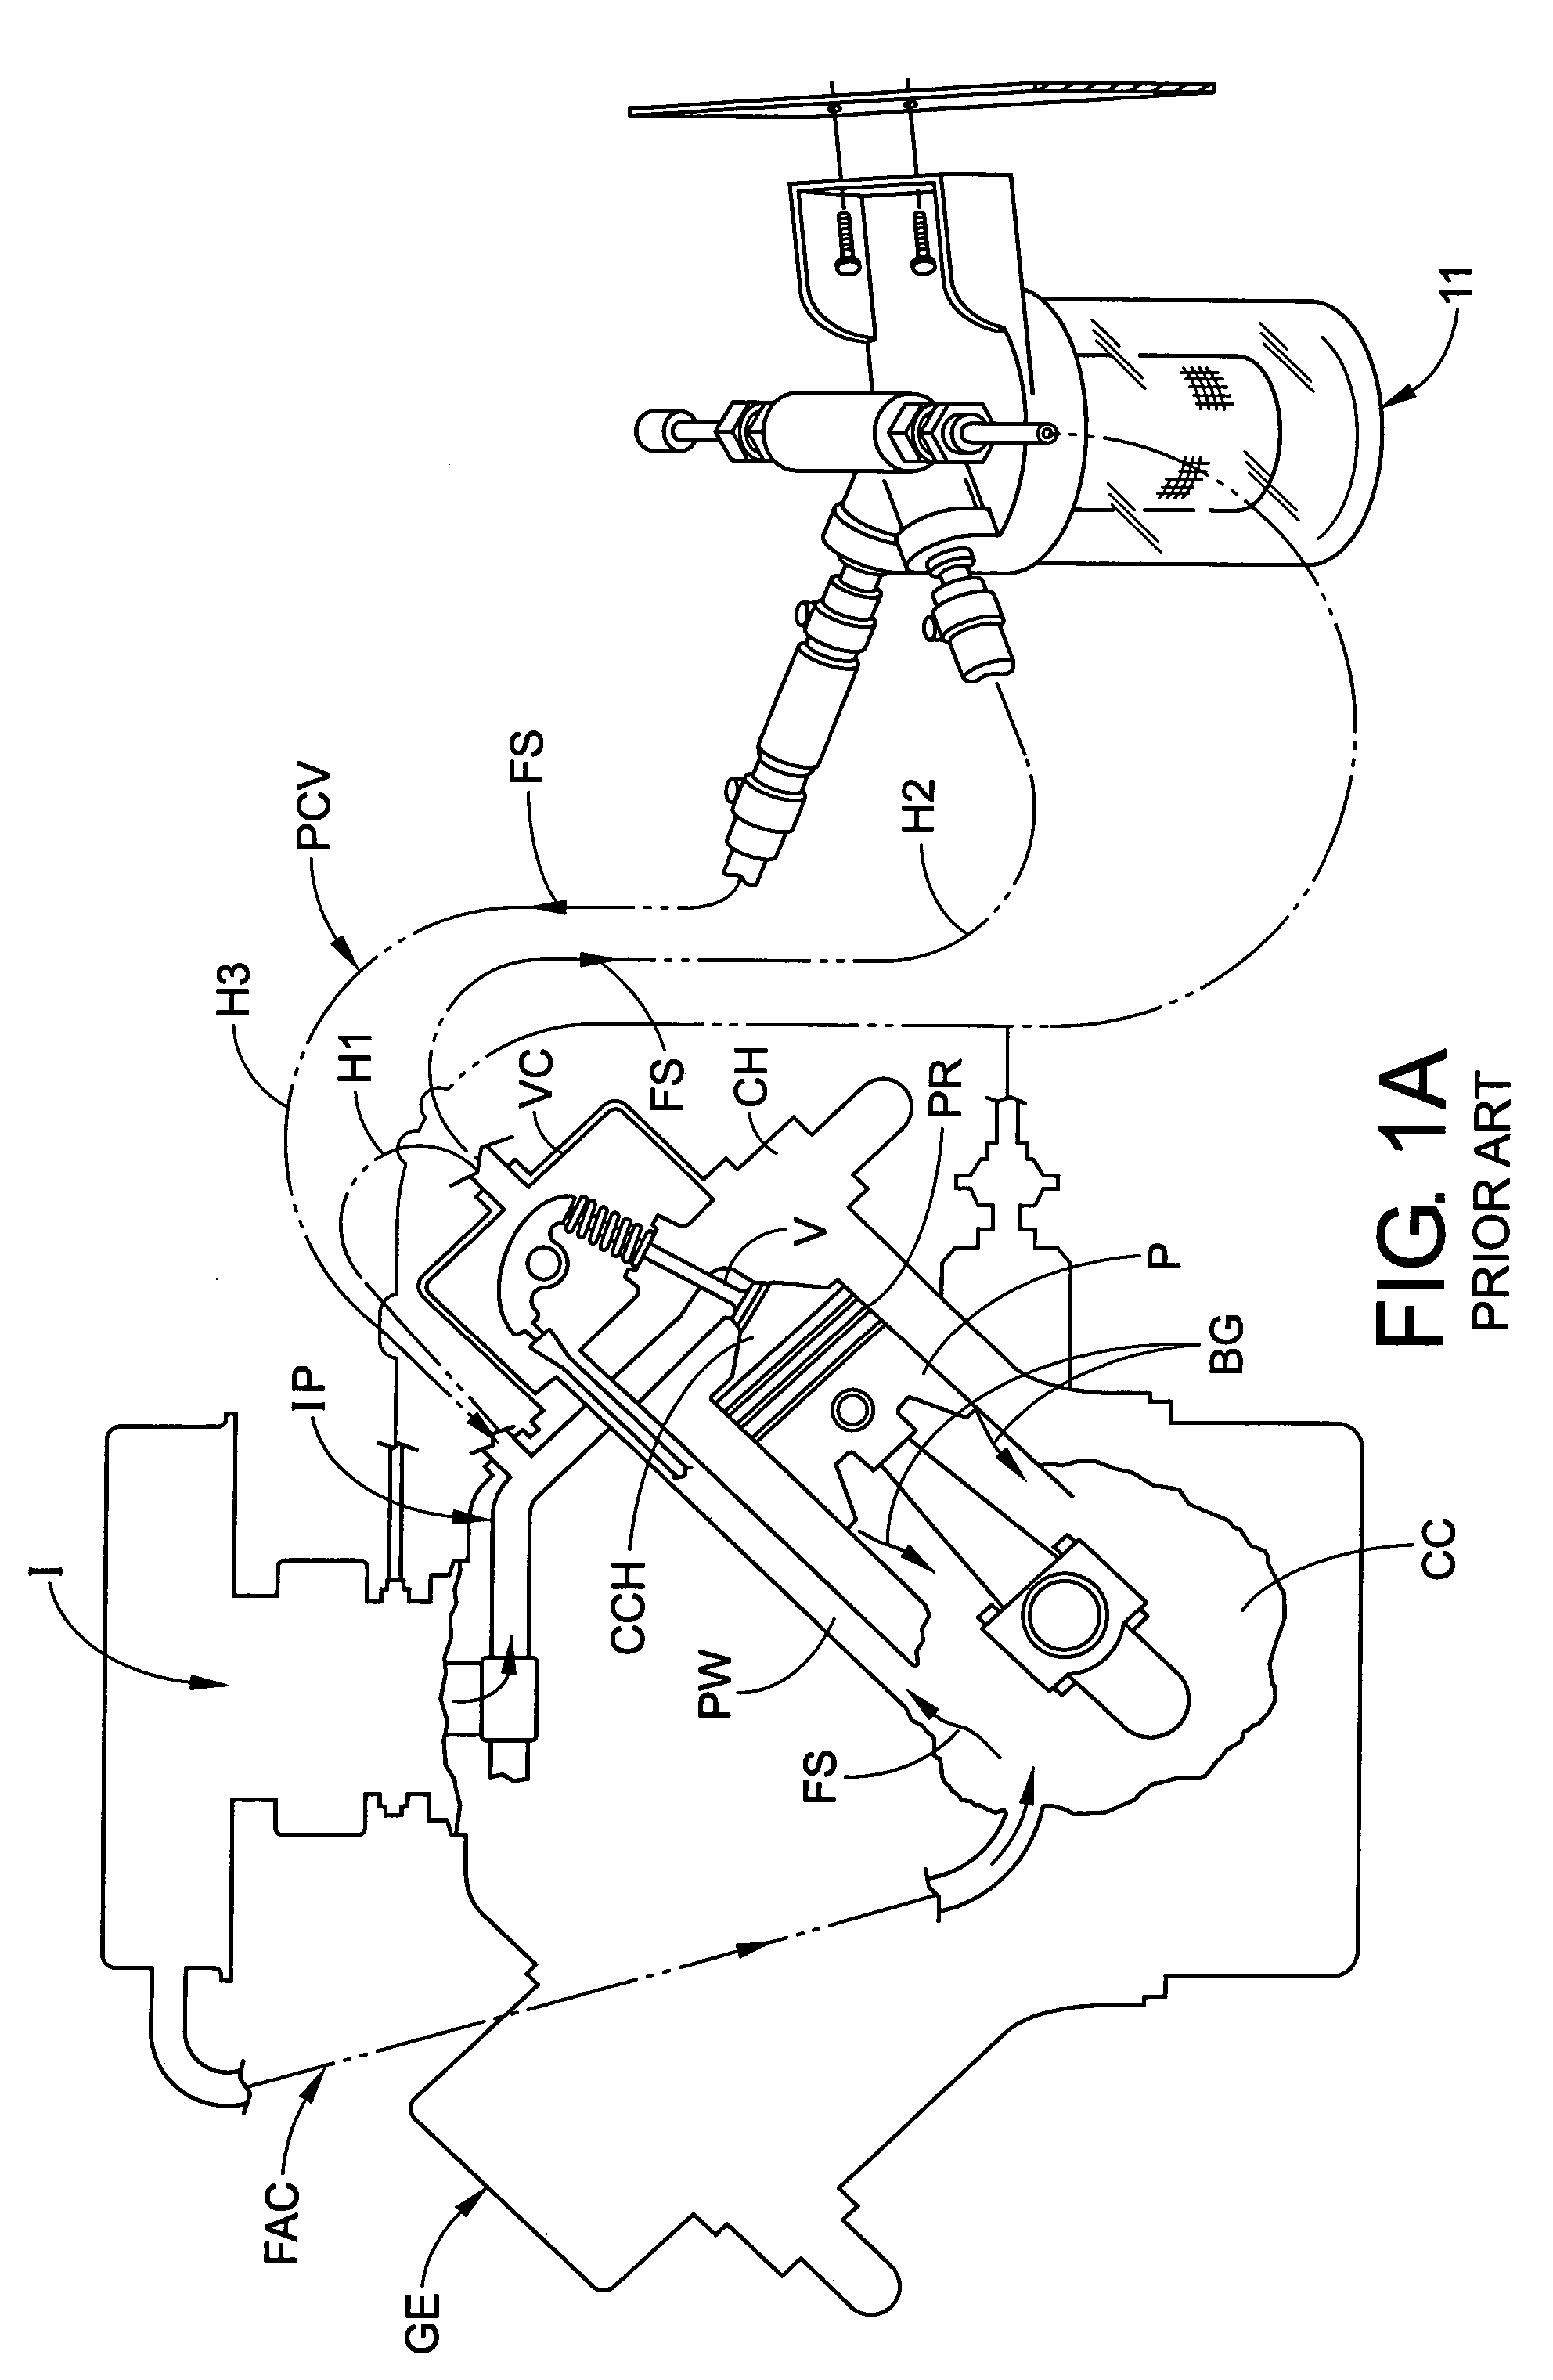 Apparatus for removing contaminants from crankcase emissions